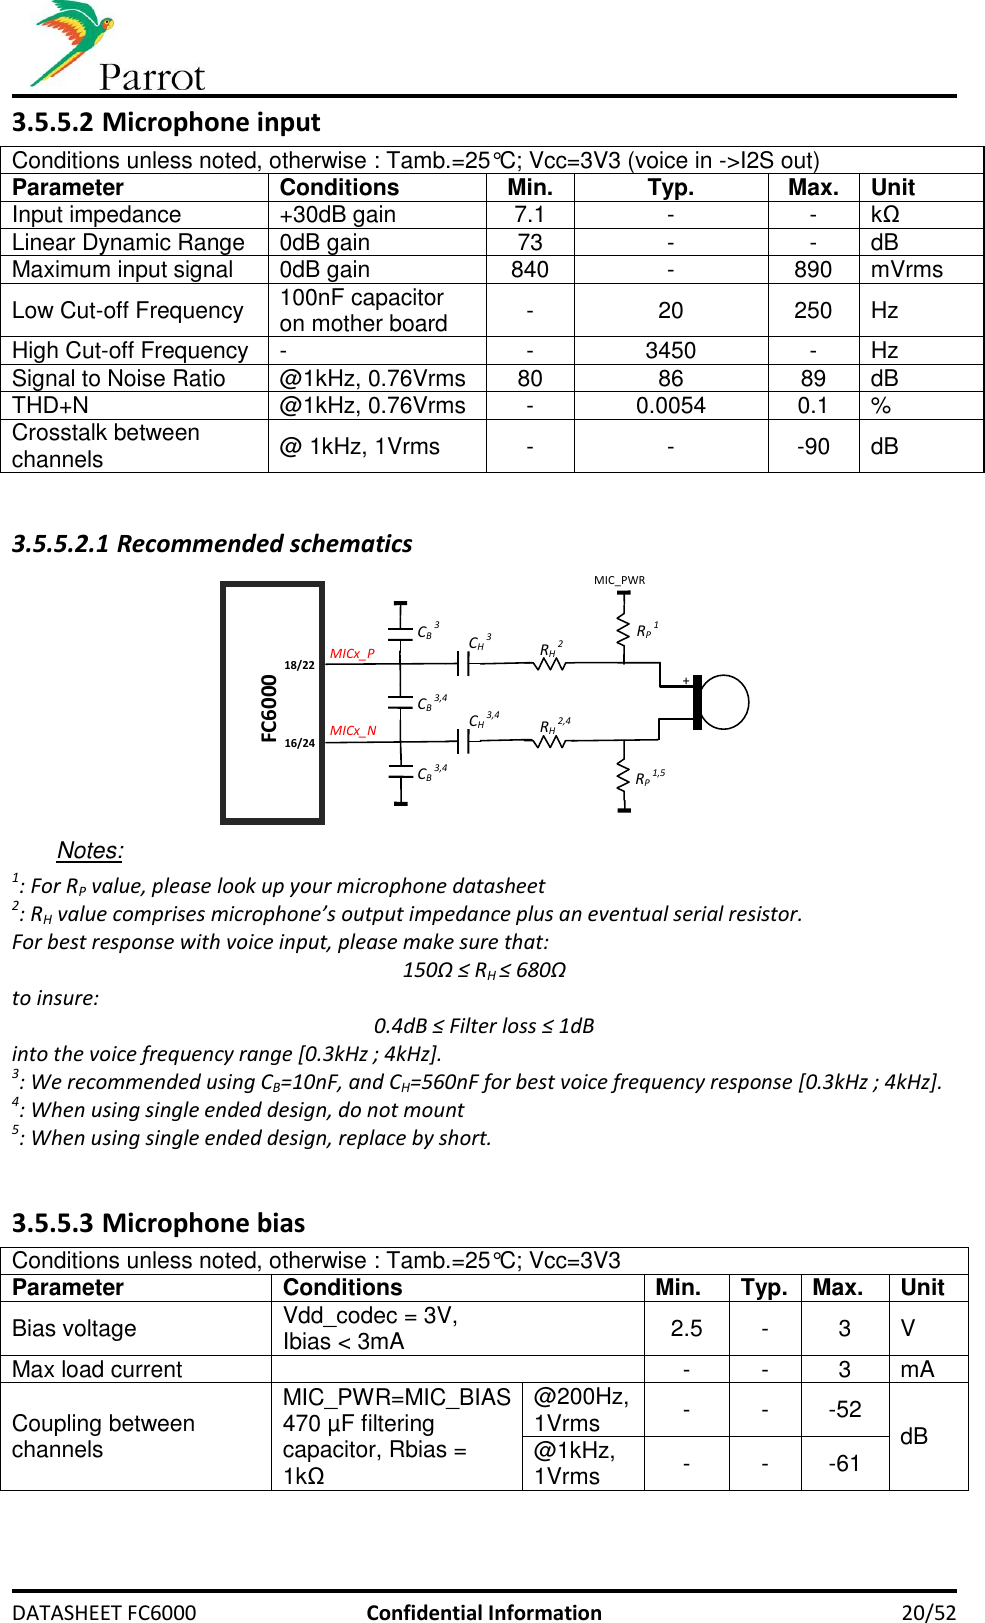     DATASHEET FC6000  Confidential Information 20/52 3.5.5.2 Microphone input Conditions unless noted, otherwise : Tamb.=25°C; Vcc=3V3 (voice in -&gt;I2S out) Parameter Conditions Min. Typ. Max. Unit Input impedance +30dB gain 7.1 - - kΩ Linear Dynamic Range 0dB gain 73 - - dB Maximum input signal  0dB gain 840 - 890 mVrms Low Cut-off Frequency 100nF capacitor on mother board - 20 250 Hz High Cut-off Frequency - - 3450 - Hz Signal to Noise Ratio @1kHz, 0.76Vrms 80 86 89 dB THD+N @1kHz, 0.76Vrms - 0.0054 0.1 % Crosstalk between channels @ 1kHz, 1Vrms - - -90 dB  3.5.5.2.1 Recommended schematics    Notes: 1: For RP value, please look up your microphone datasheet  2: RH value comprises microphone’s output impedance plus an eventual serial resistor. For best response with voice input, please make sure that: 150Ω ≤ RH ≤ 680Ω to insure:  0.4dB ≤ Filter loss ≤ 1dB into the voice frequency range [0.3kHz ; 4kHz]. 3: We recommended using CB=10nF, and CH=560nF for best voice frequency response [0.3kHz ; 4kHz]. 4: When using single ended design, do not mount  5: When using single ended design, replace by short.  3.5.5.3 Microphone bias Conditions unless noted, otherwise : Tamb.=25°C; Vcc=3V3 Parameter Conditions Min. Typ. Max. Unit Bias voltage Vdd_codec = 3V, Ibias &lt; 3mA 2.5 - 3 V Max load current  - - 3 mA Coupling between channels MIC_PWR=MIC_BIAS 470 µF filtering capacitor, Rbias = 1kΩ @200Hz, 1Vrms - - -52 dB @1kHz, 1Vrms - - -61  MICx_P FC6000 RH 2,4 MICx_N RH 2 CB 3 CB 3,4  CB 3,4   CH 3   CH 3,4 MIC_PWR RP 1 RP 1,5 + 18/22 16/24 